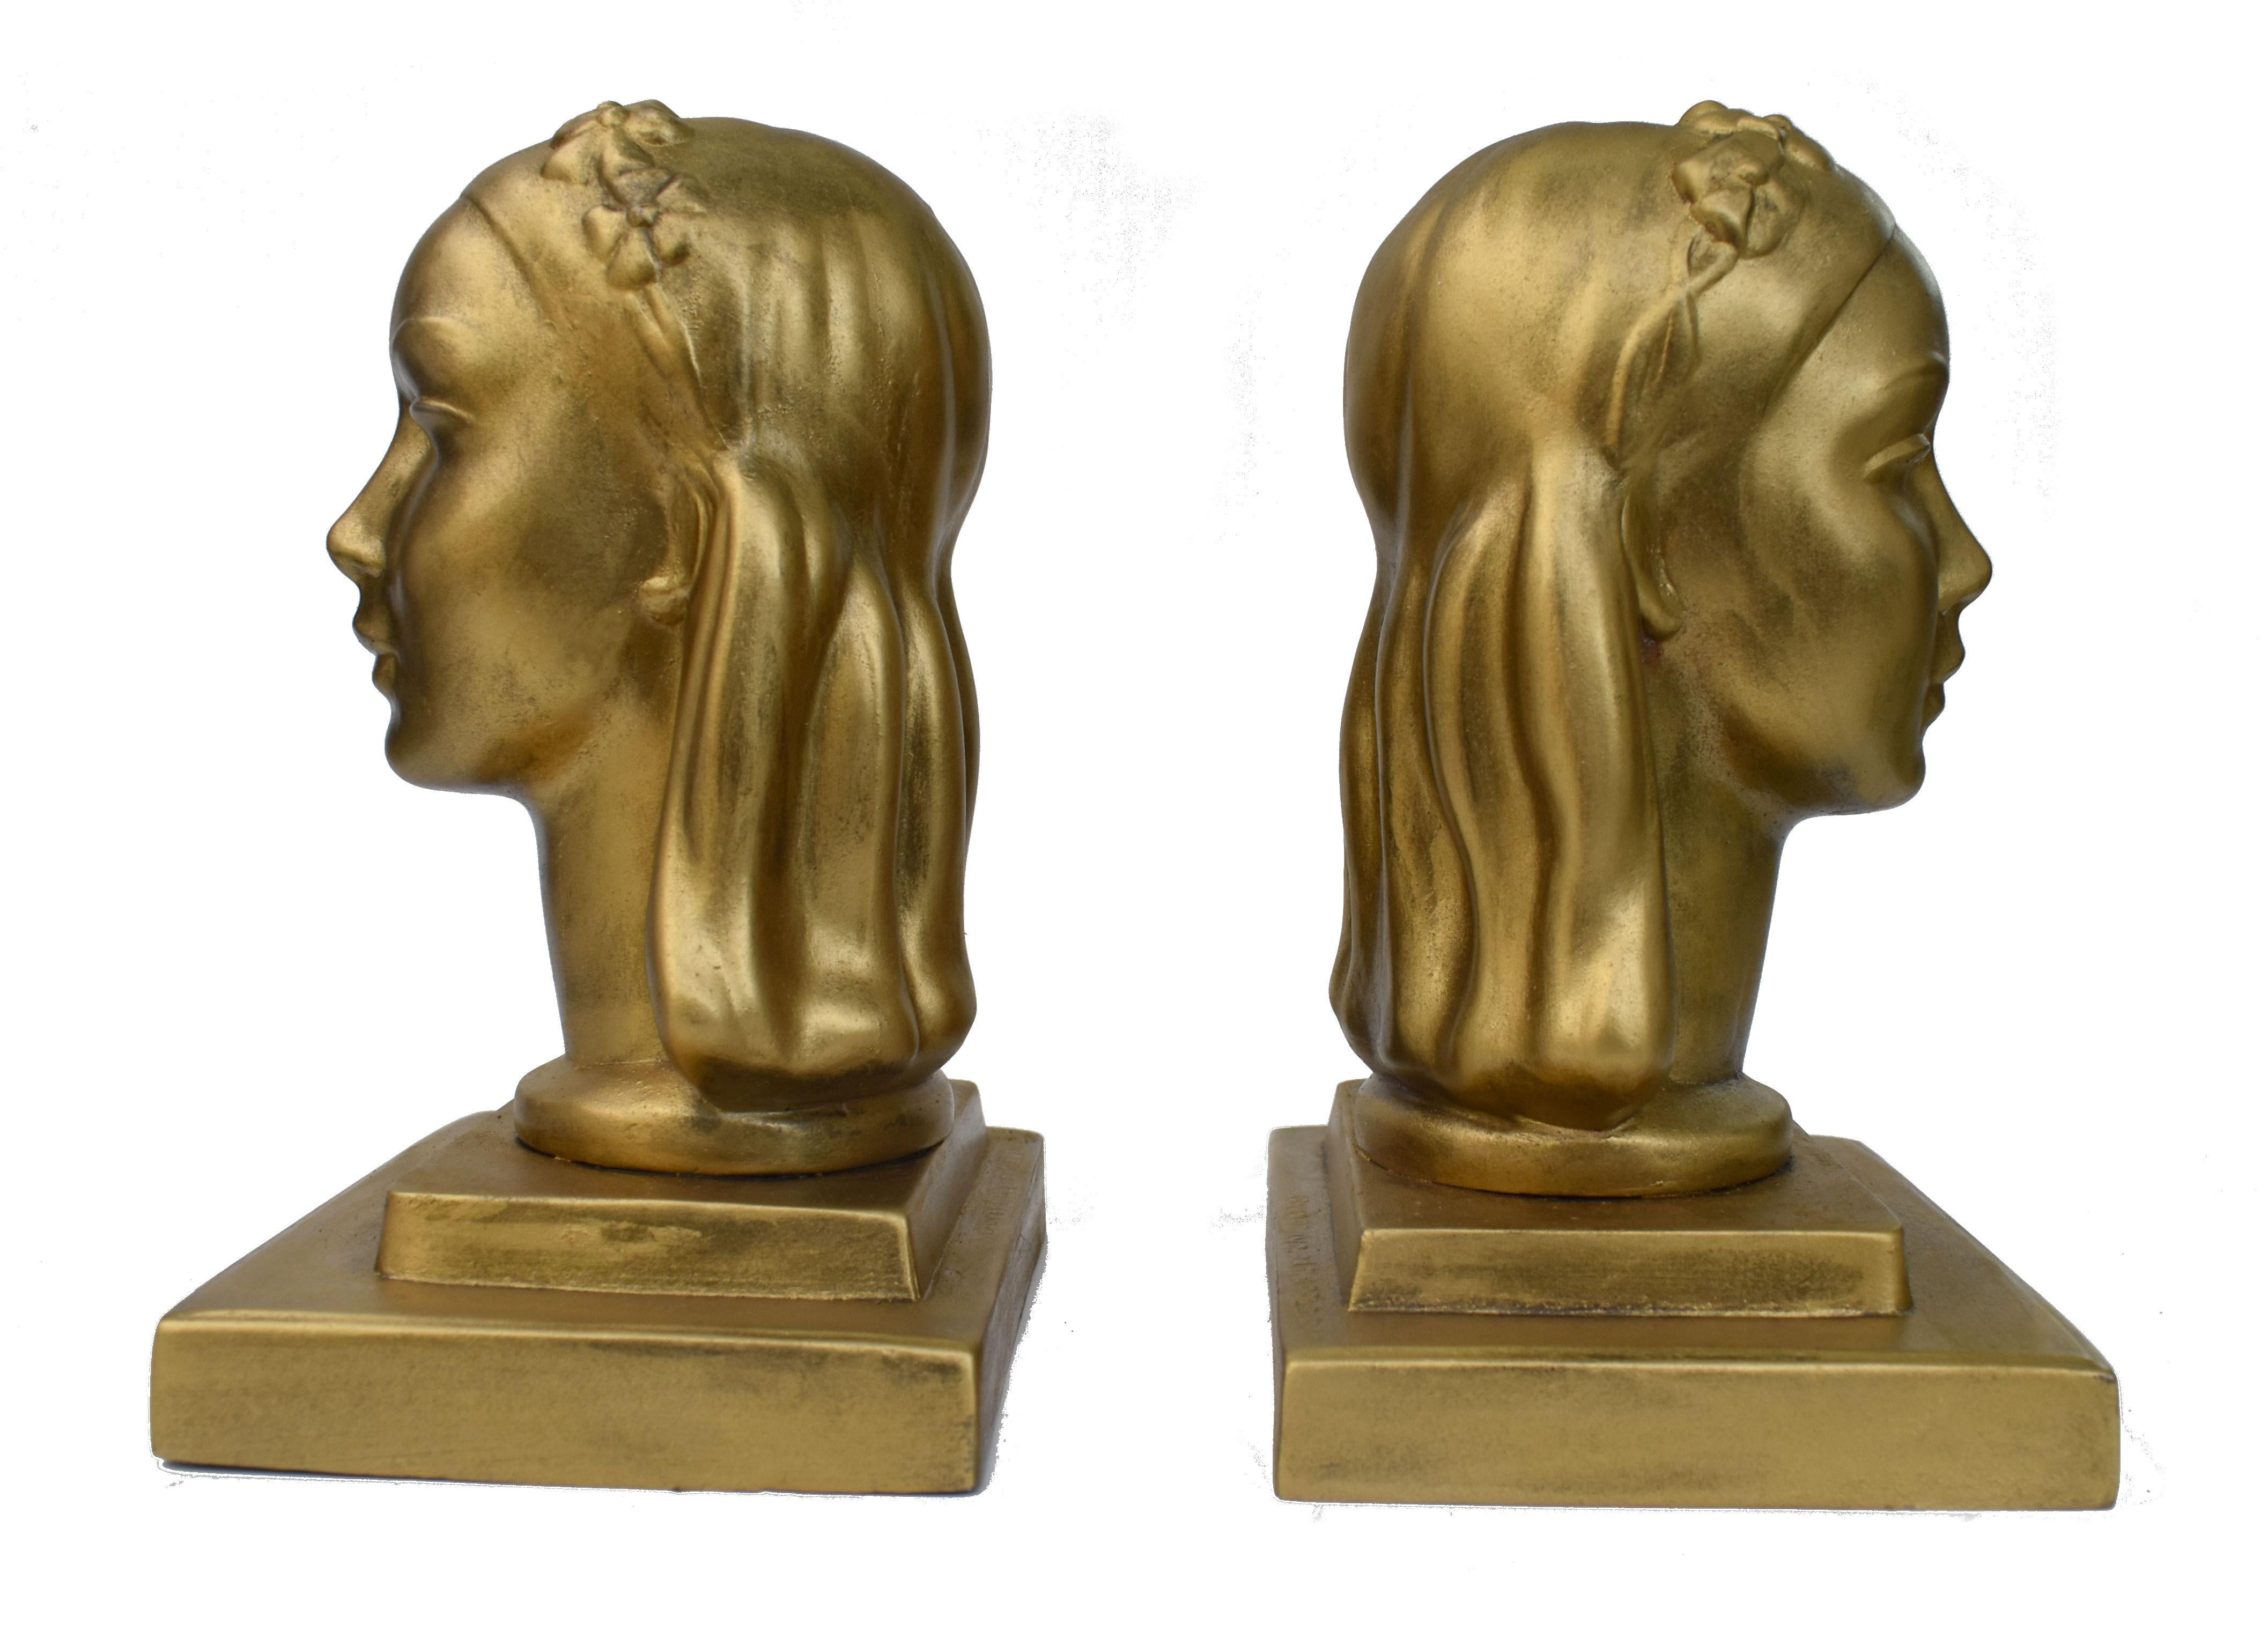 American Art Deco Female Bust Bookends by Frankart Inc, c1930